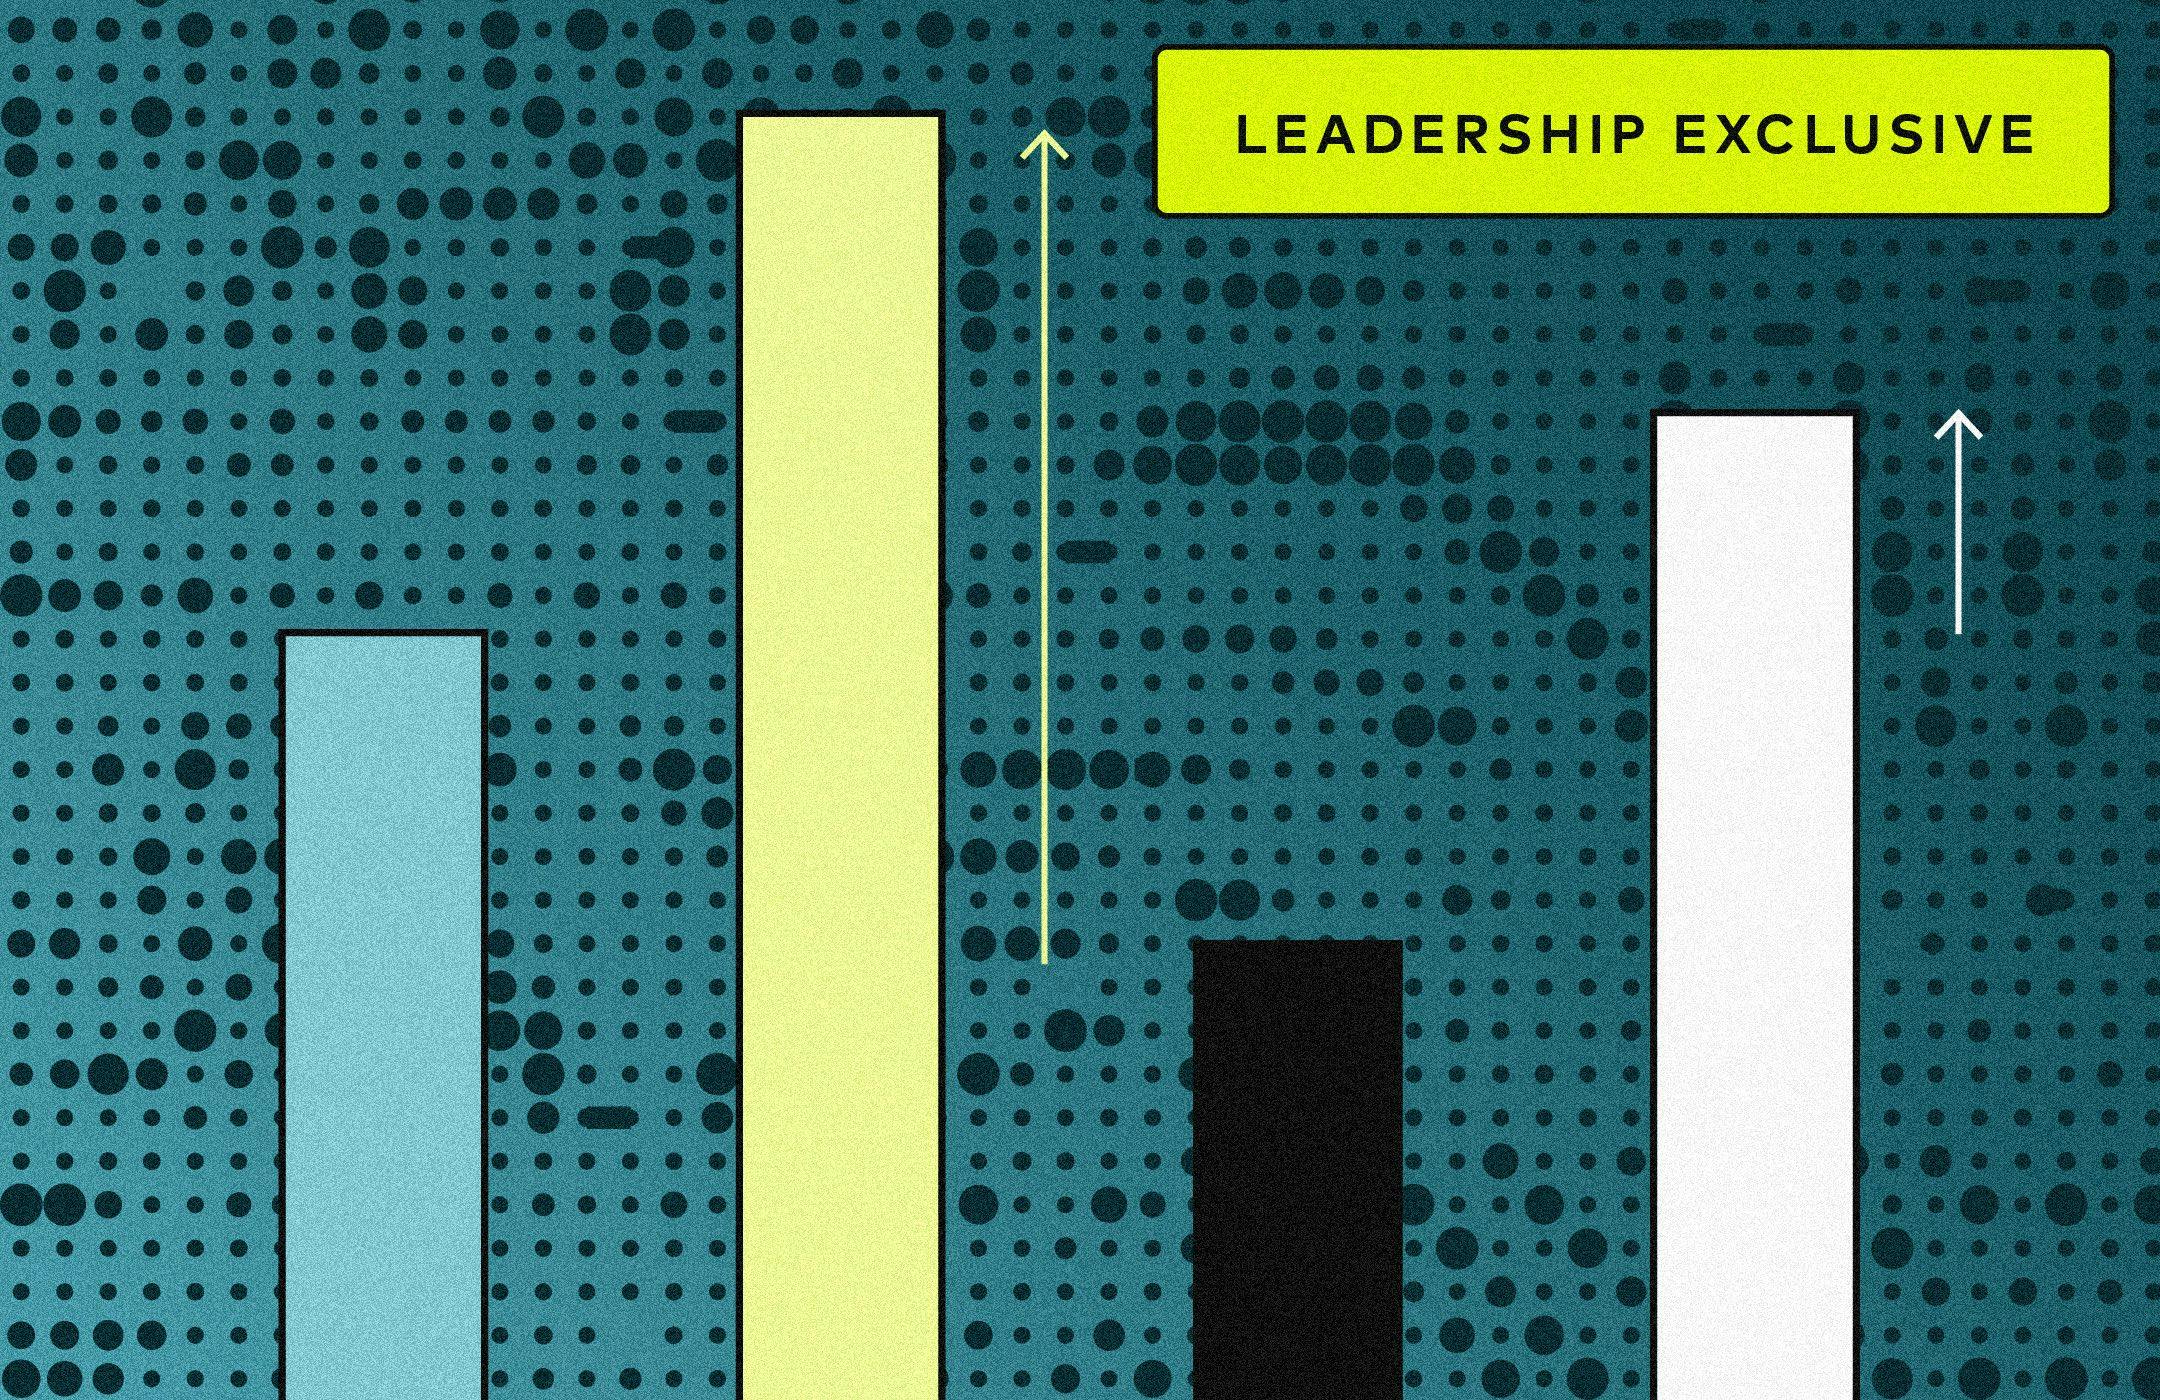 Bar graph with the Amperity yellow bar accelerating higher, with tag "Leadership Exclusive".